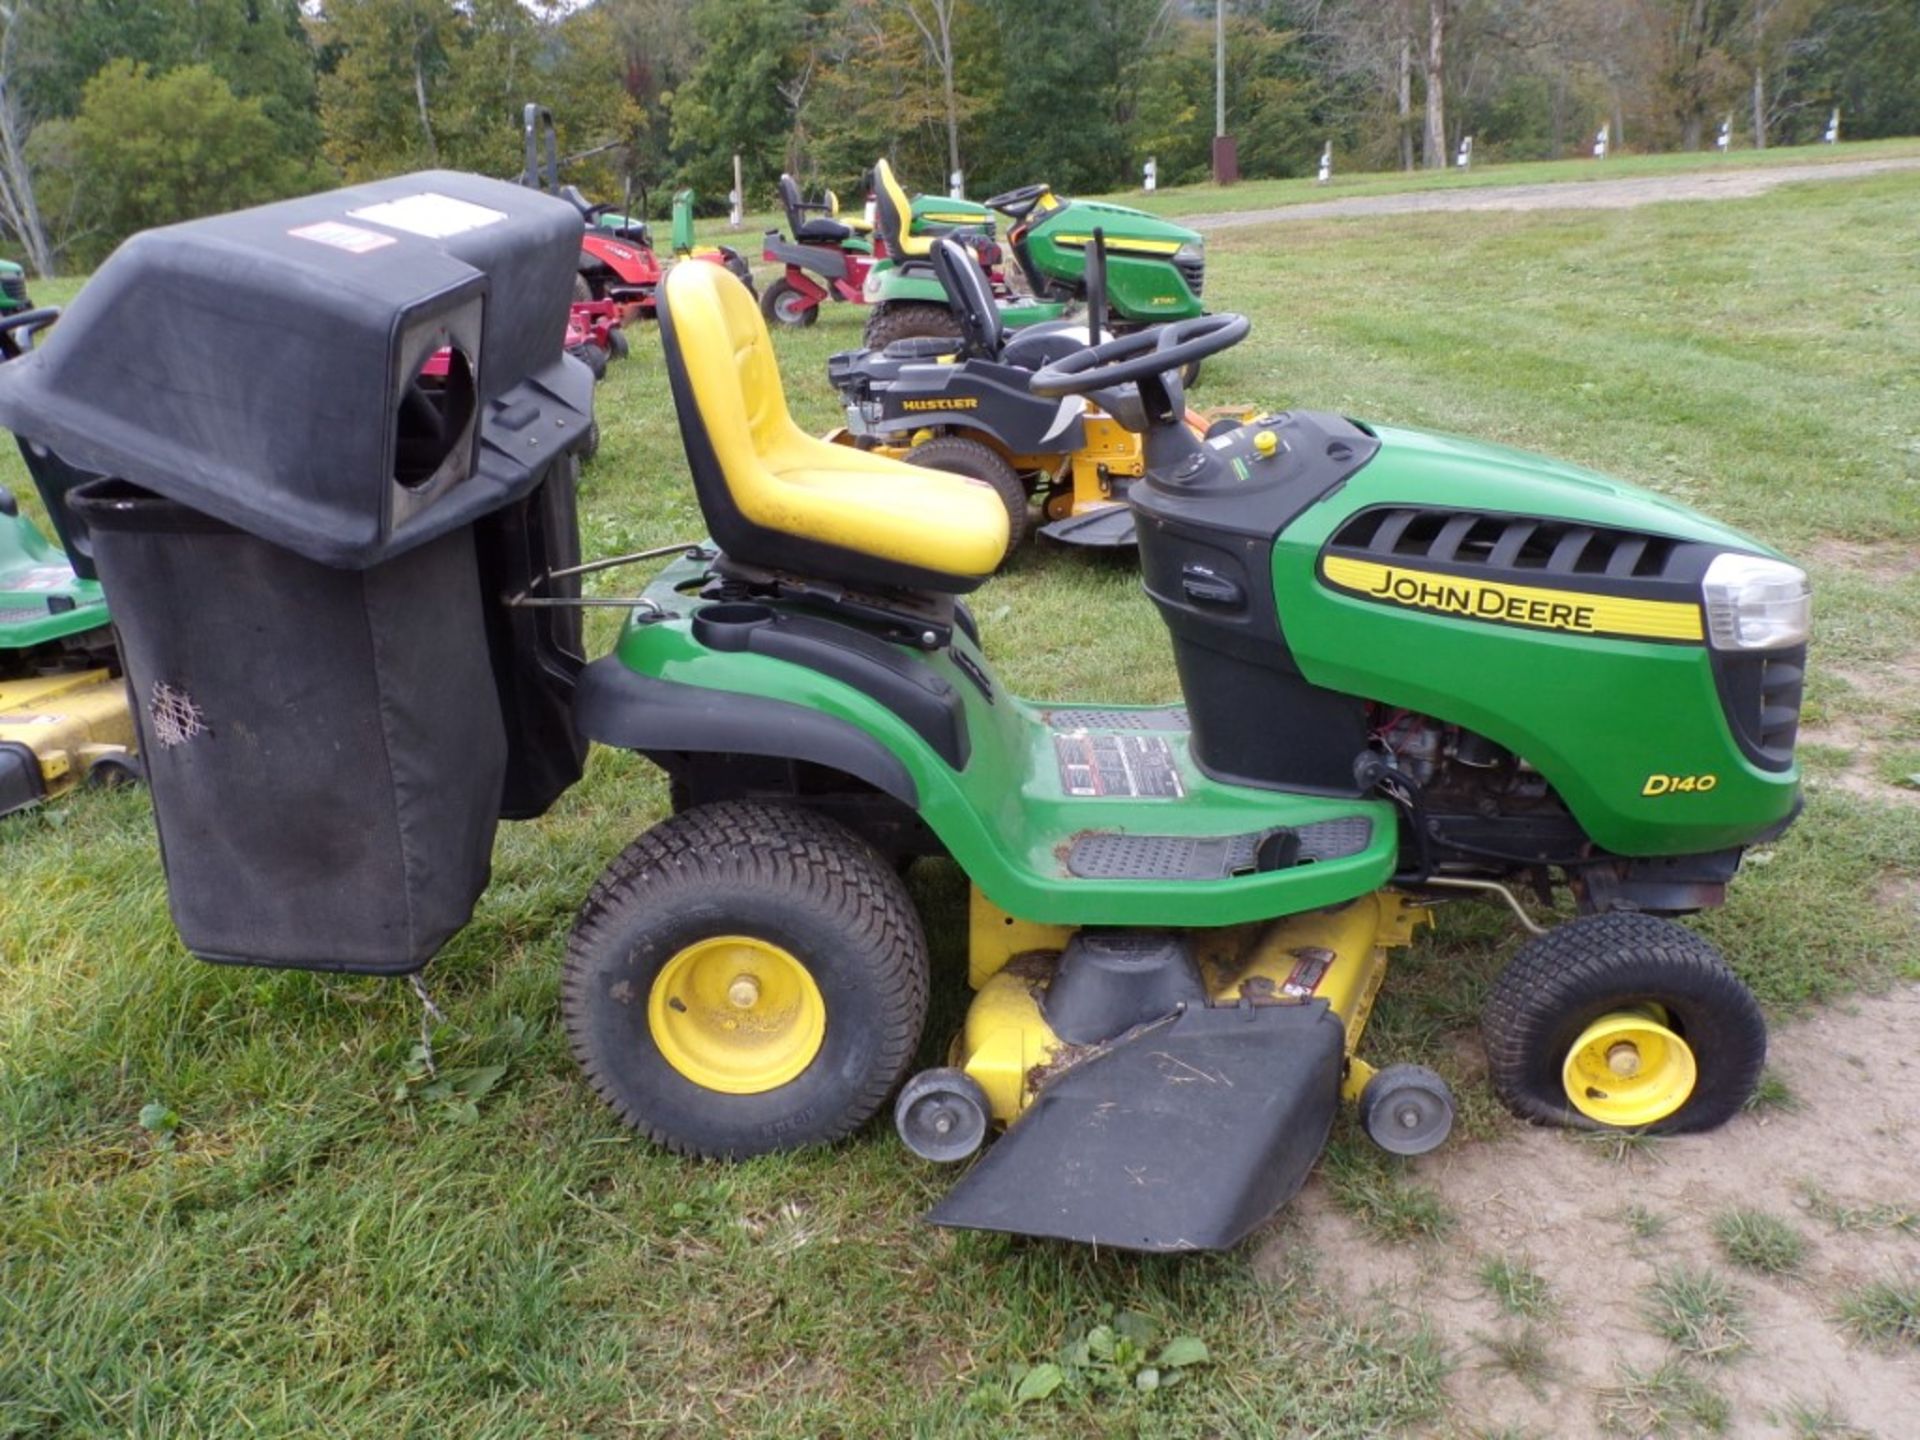 John Deere D140 Riding Mower w/48'' Deck, 22 HP Engine, Seat Is Ripped, Has Bagger, Looks - Image 2 of 2